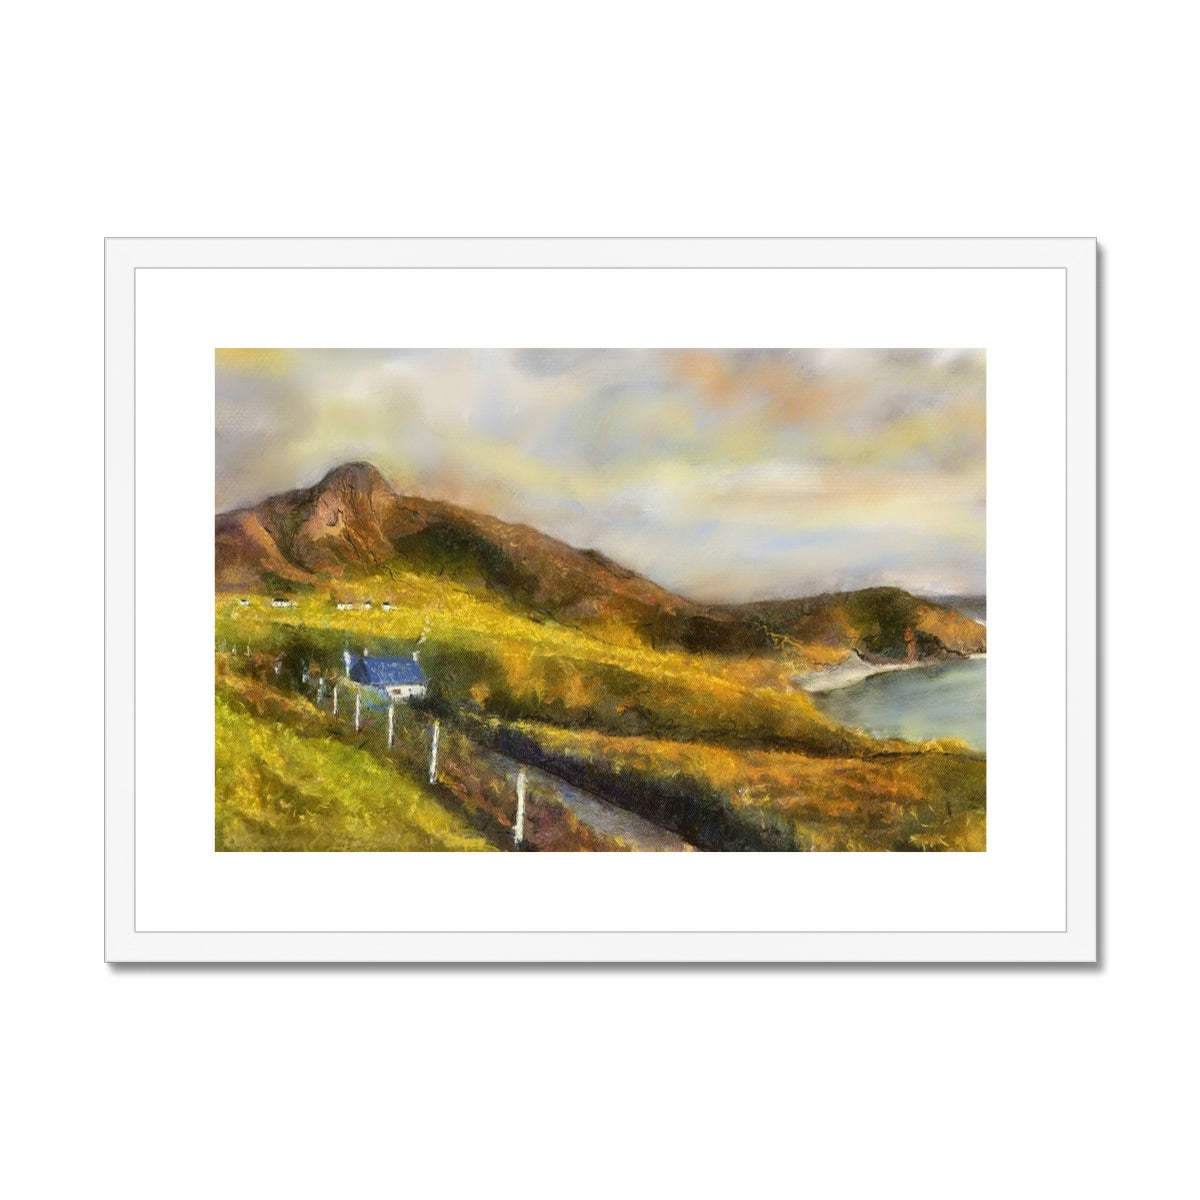 Coldbackie Painting | Framed & Mounted Prints From Scotland-Framed & Mounted Prints-Scottish Highlands & Lowlands Art Gallery-A2 Landscape-White Frame-Paintings, Prints, Homeware, Art Gifts From Scotland By Scottish Artist Kevin Hunter